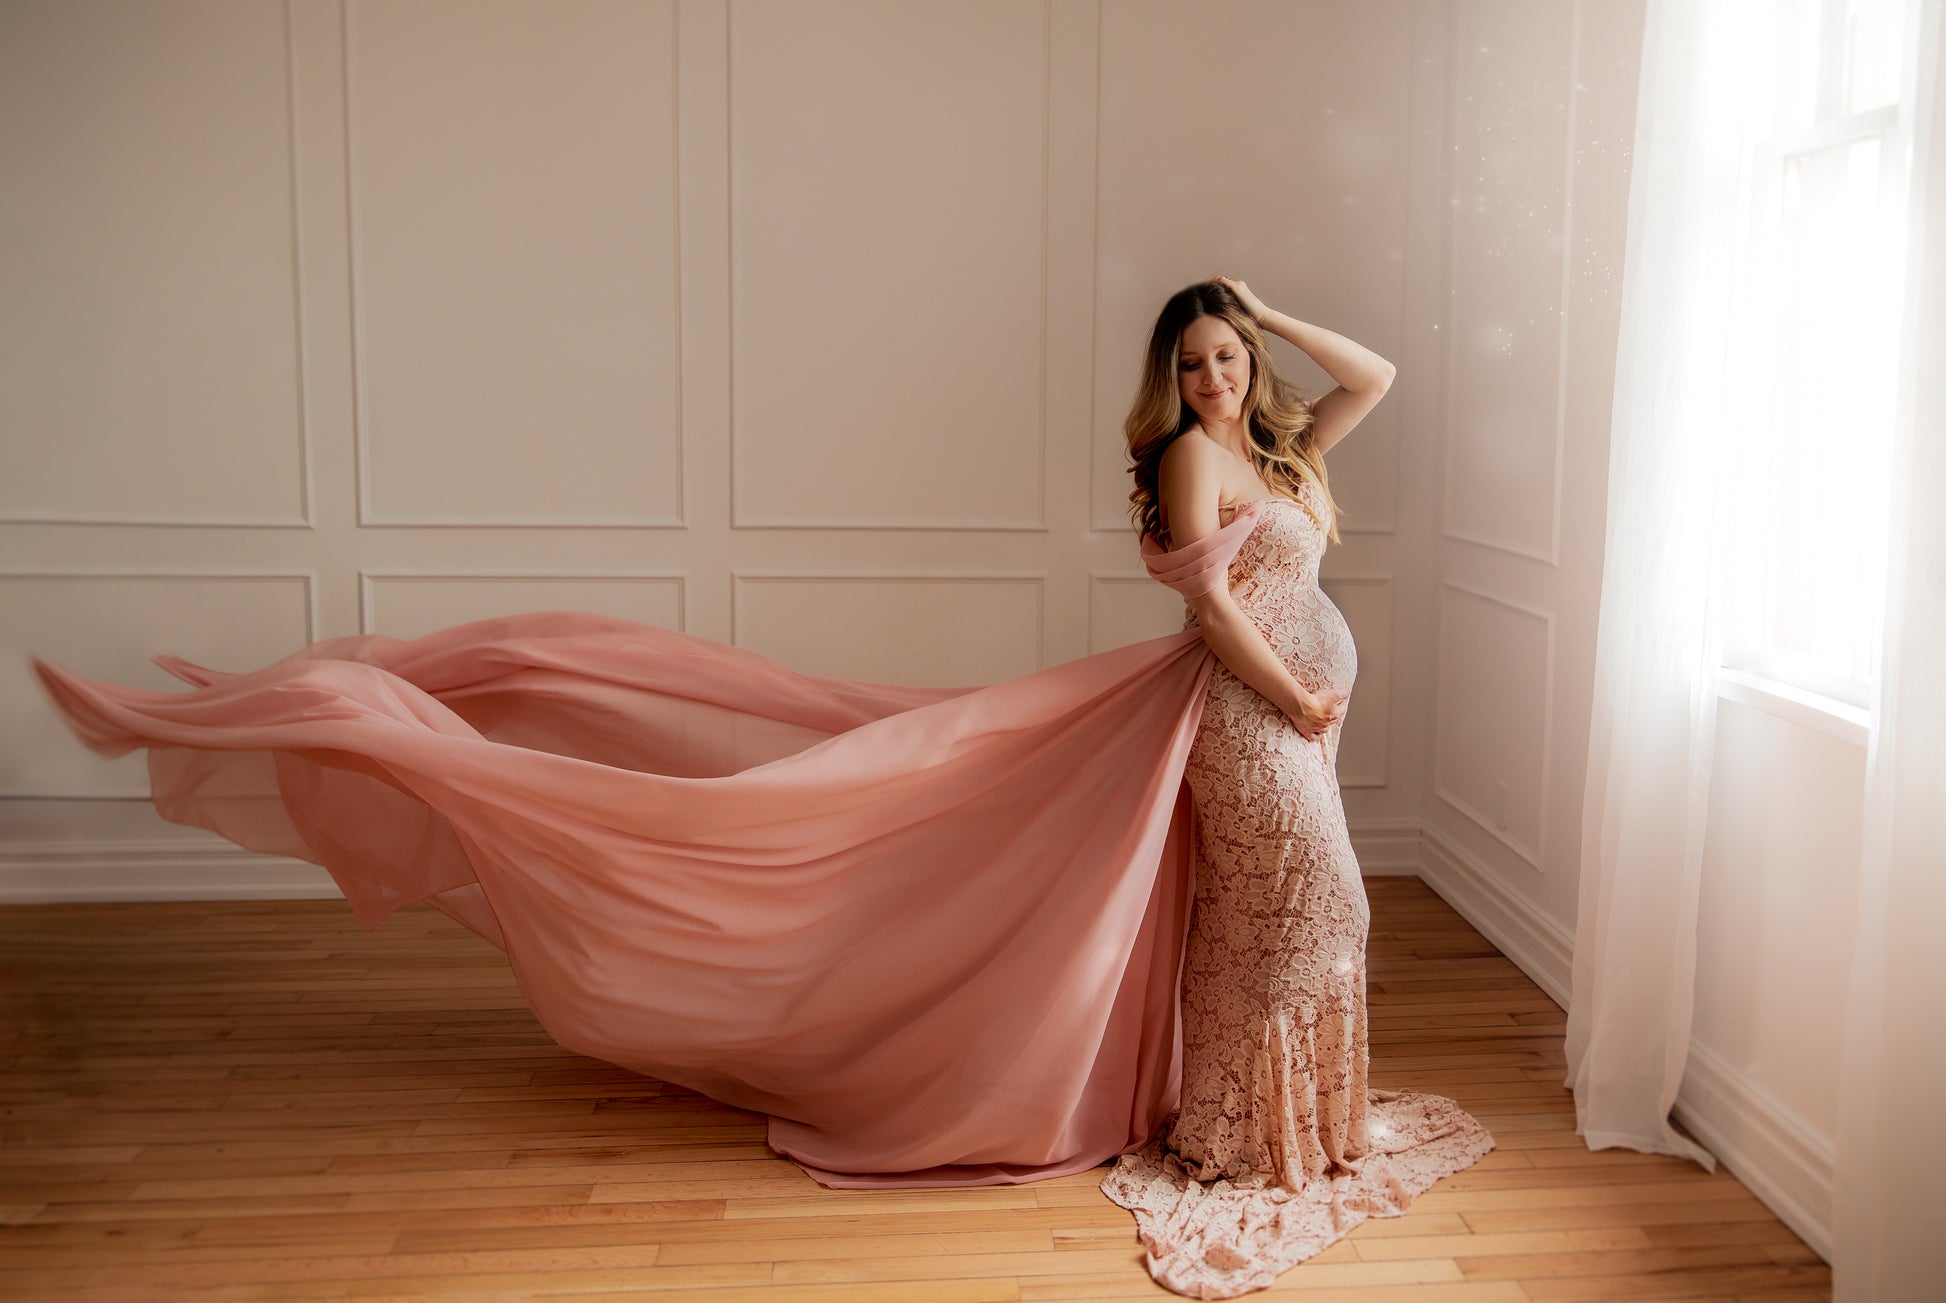 Dusty Pink Papoula Gown – Sugar Bump Gown Rentals